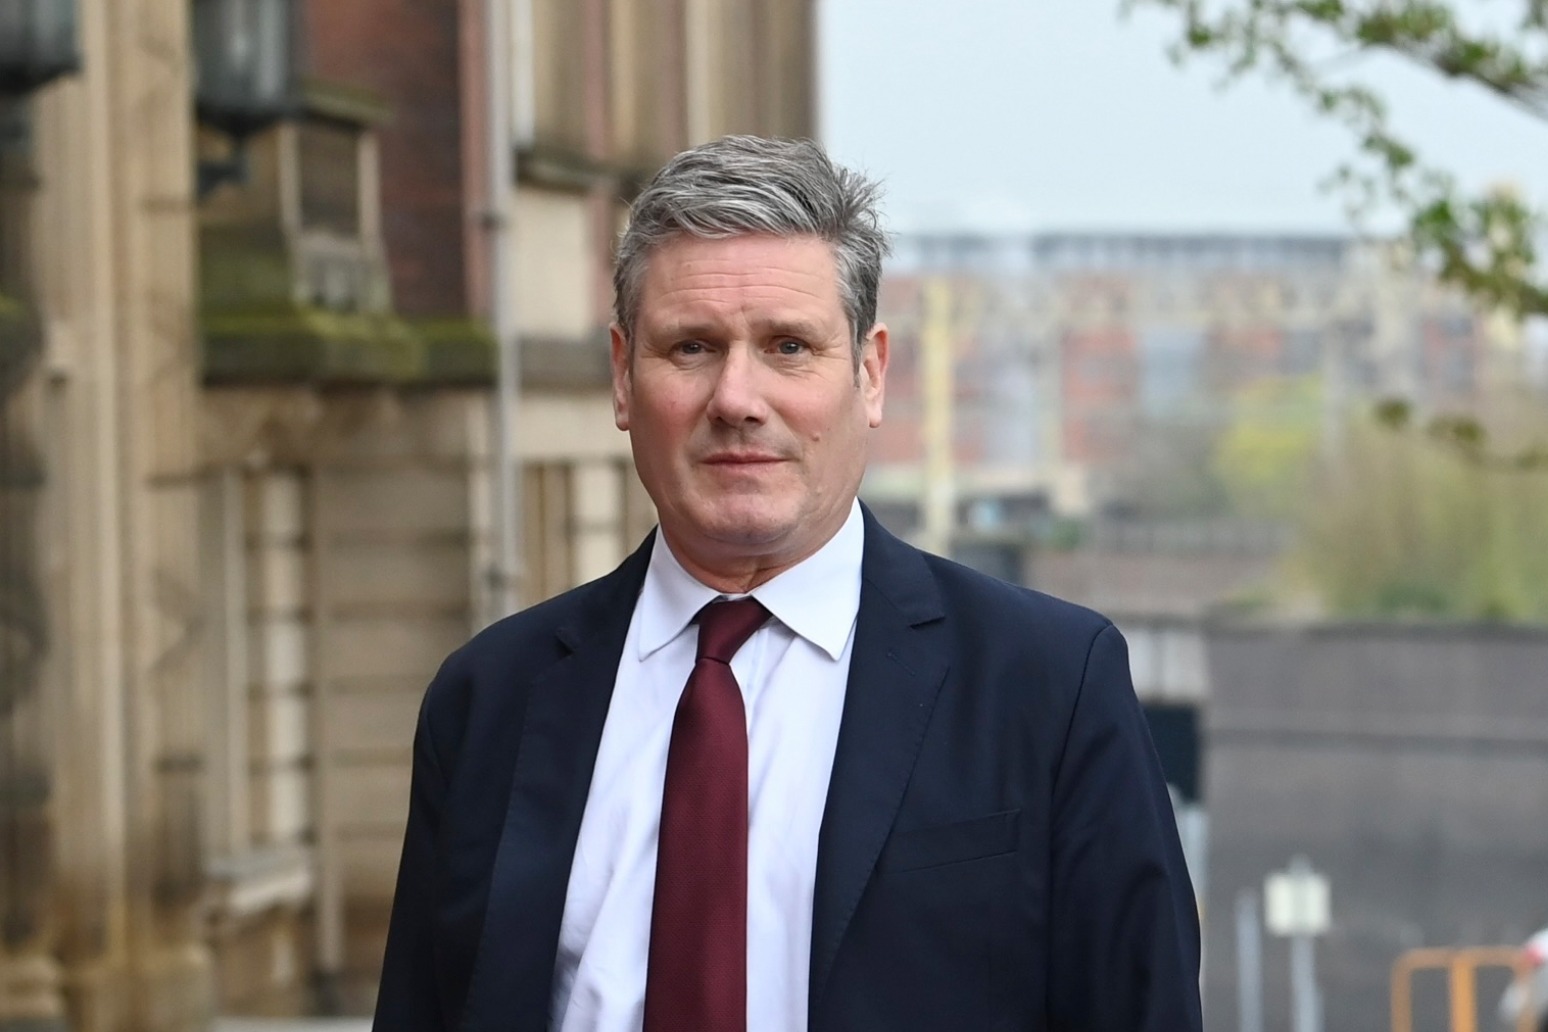 Tory refusal to vote down new PM probe shows he has lost support – Starmer 